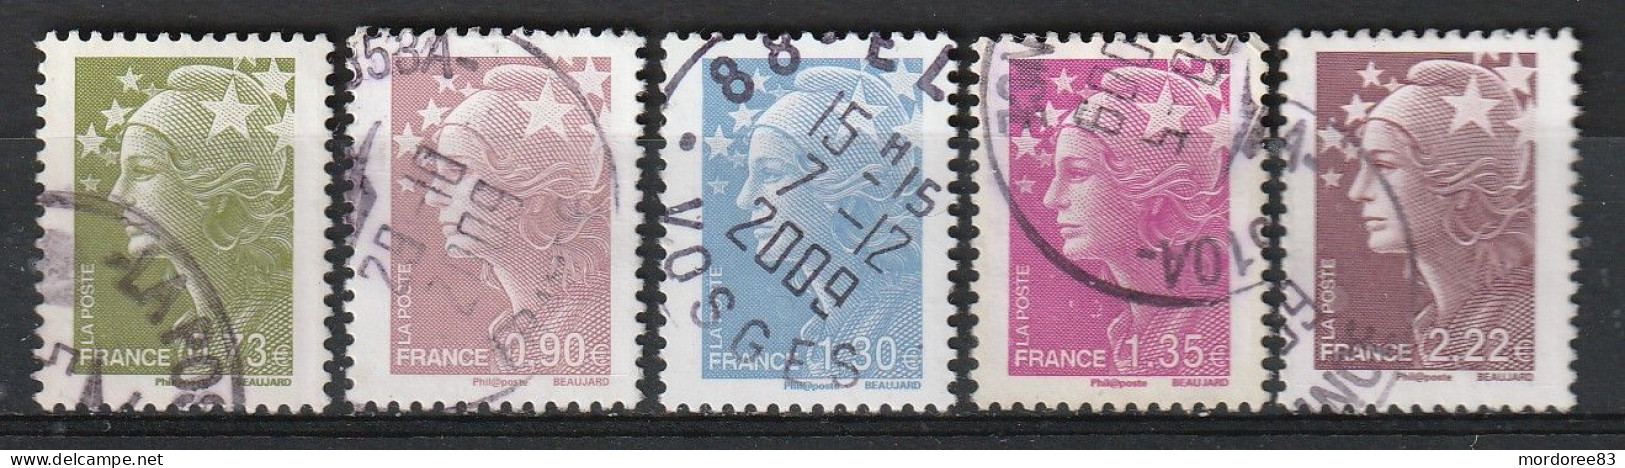 FRANCE 2009 MARIANNE DE BEAUJARD  YT 4342 A 4346 OBLITERE - Used Stamps